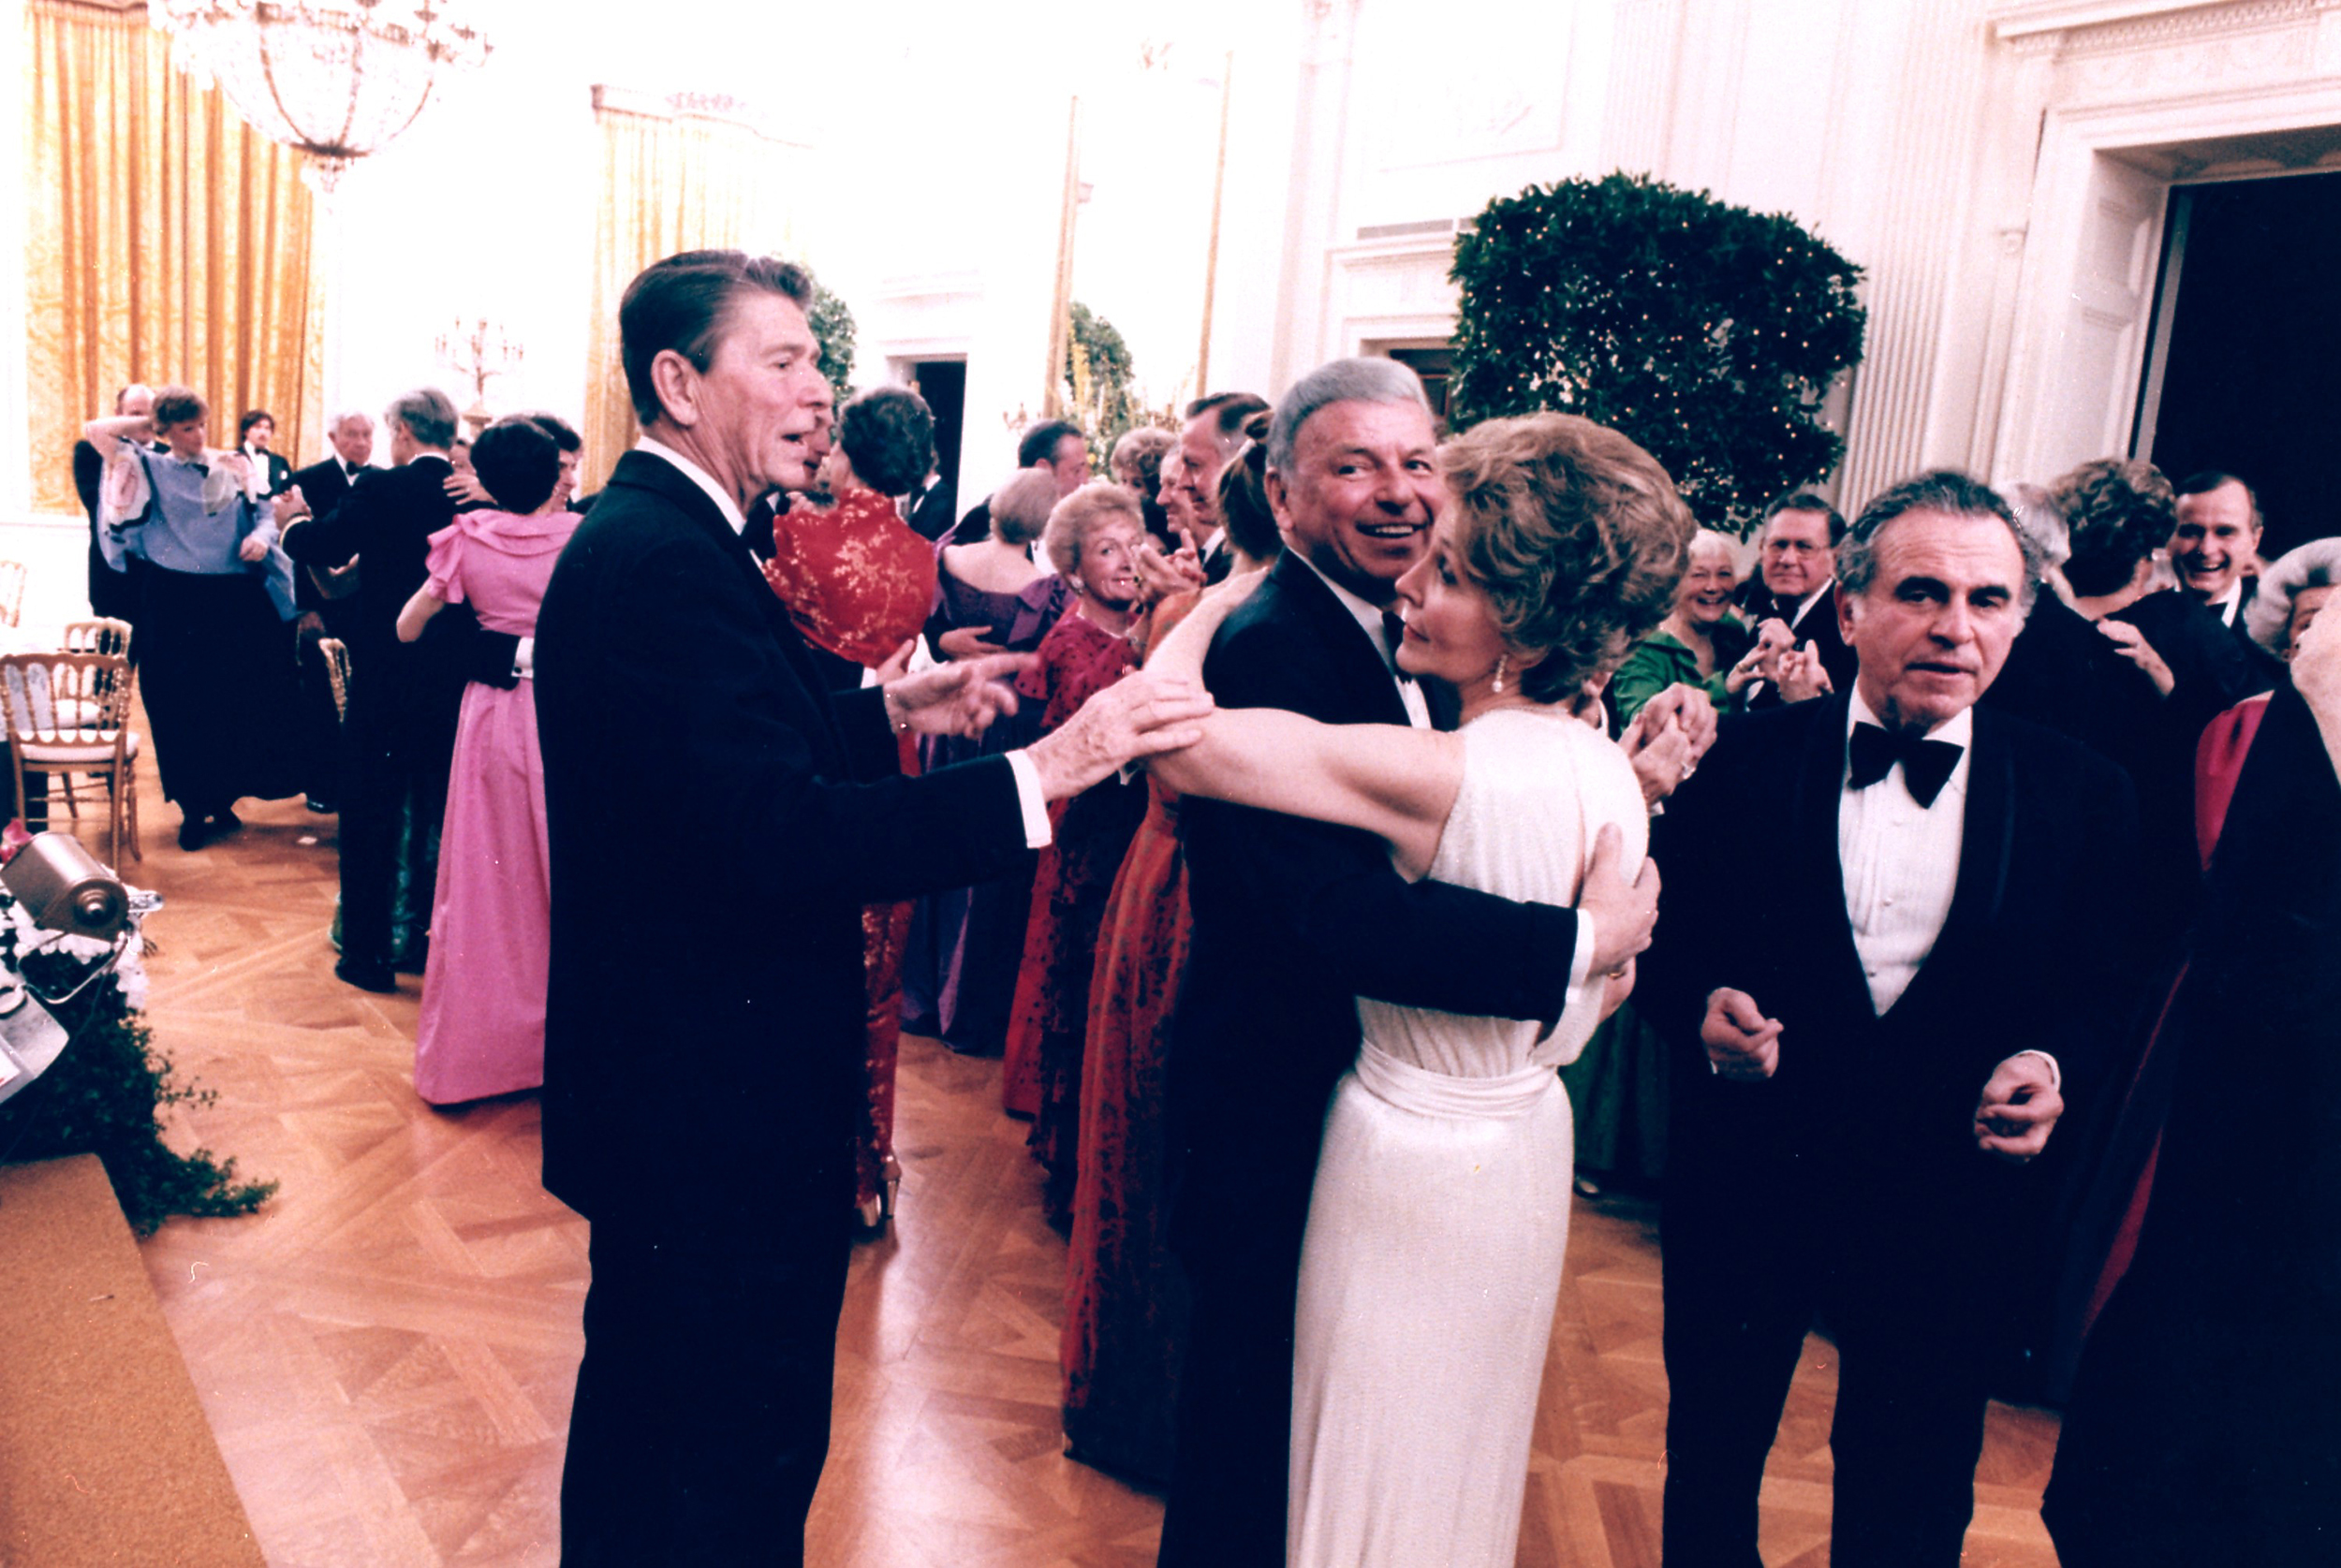 Ronald Reagan cuts in on singer Frank Sinatra, dancing with former first lady Nancy Reagan during a party in the East Room of the White House on Feb. 6, 1981.